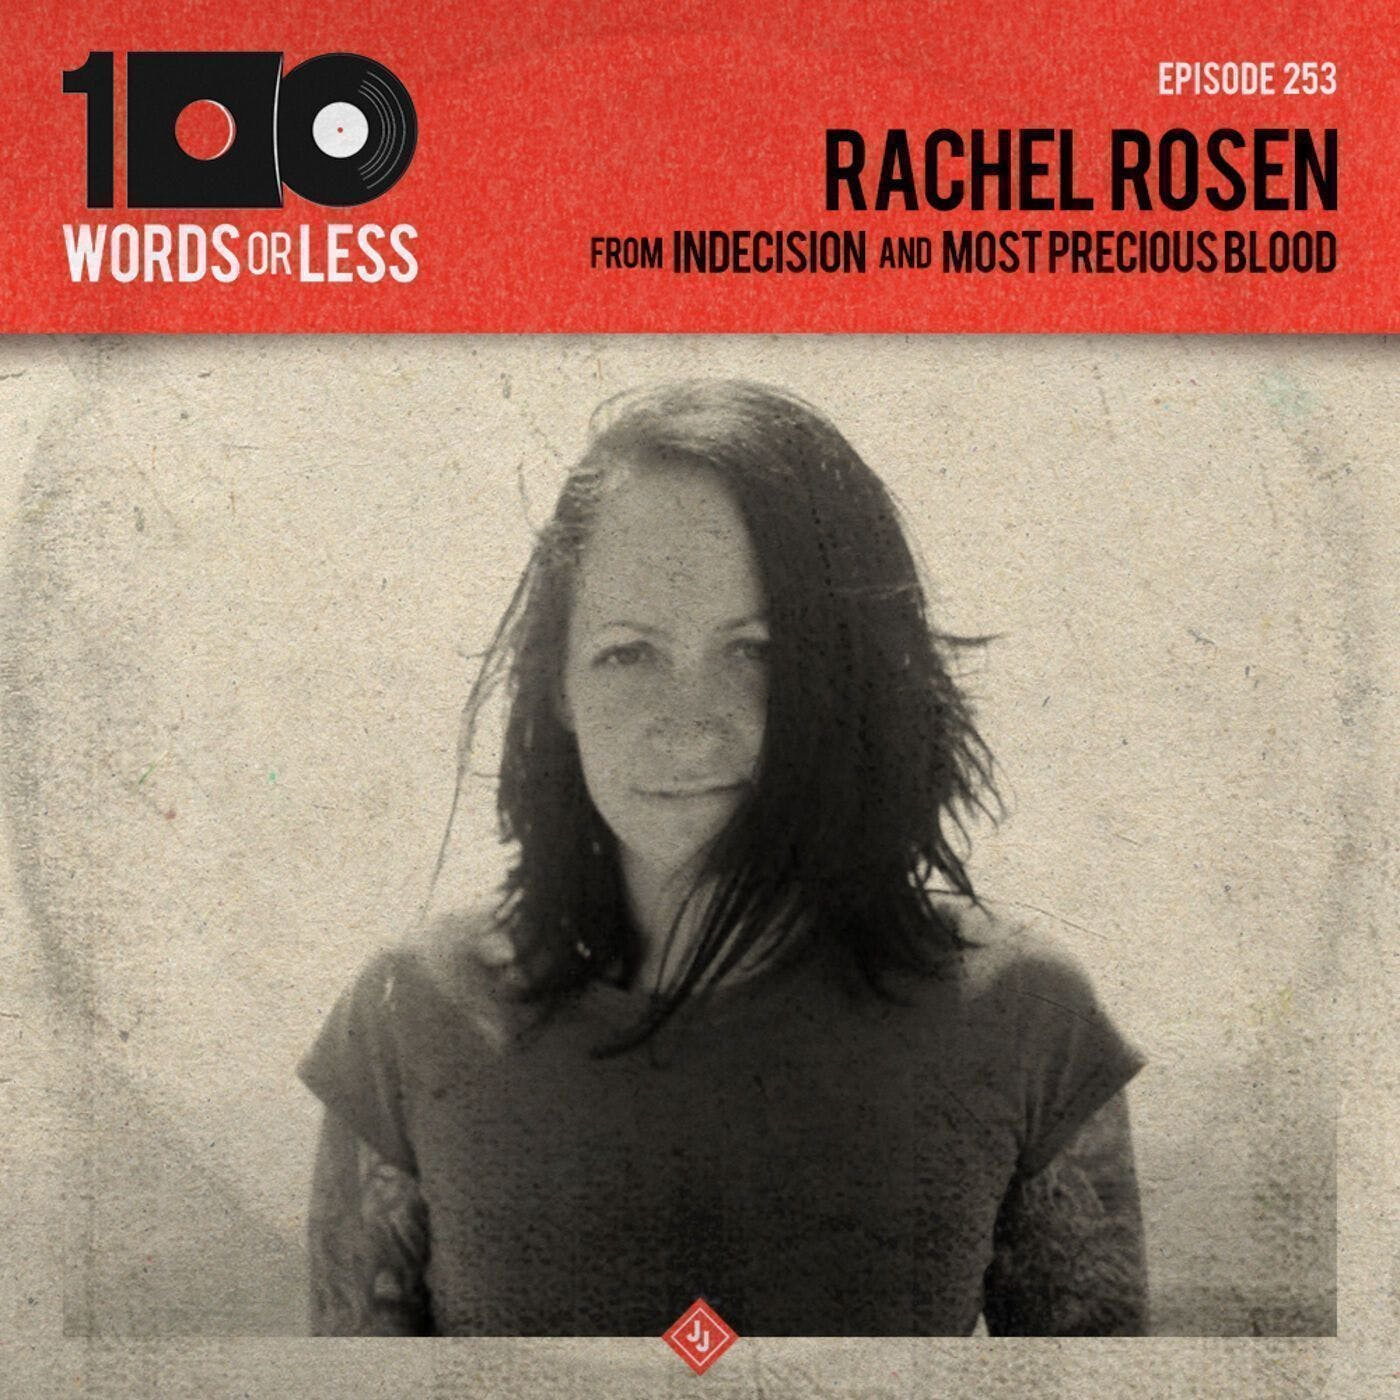 Rachel Rosen from Most Precious Blood/Indecision